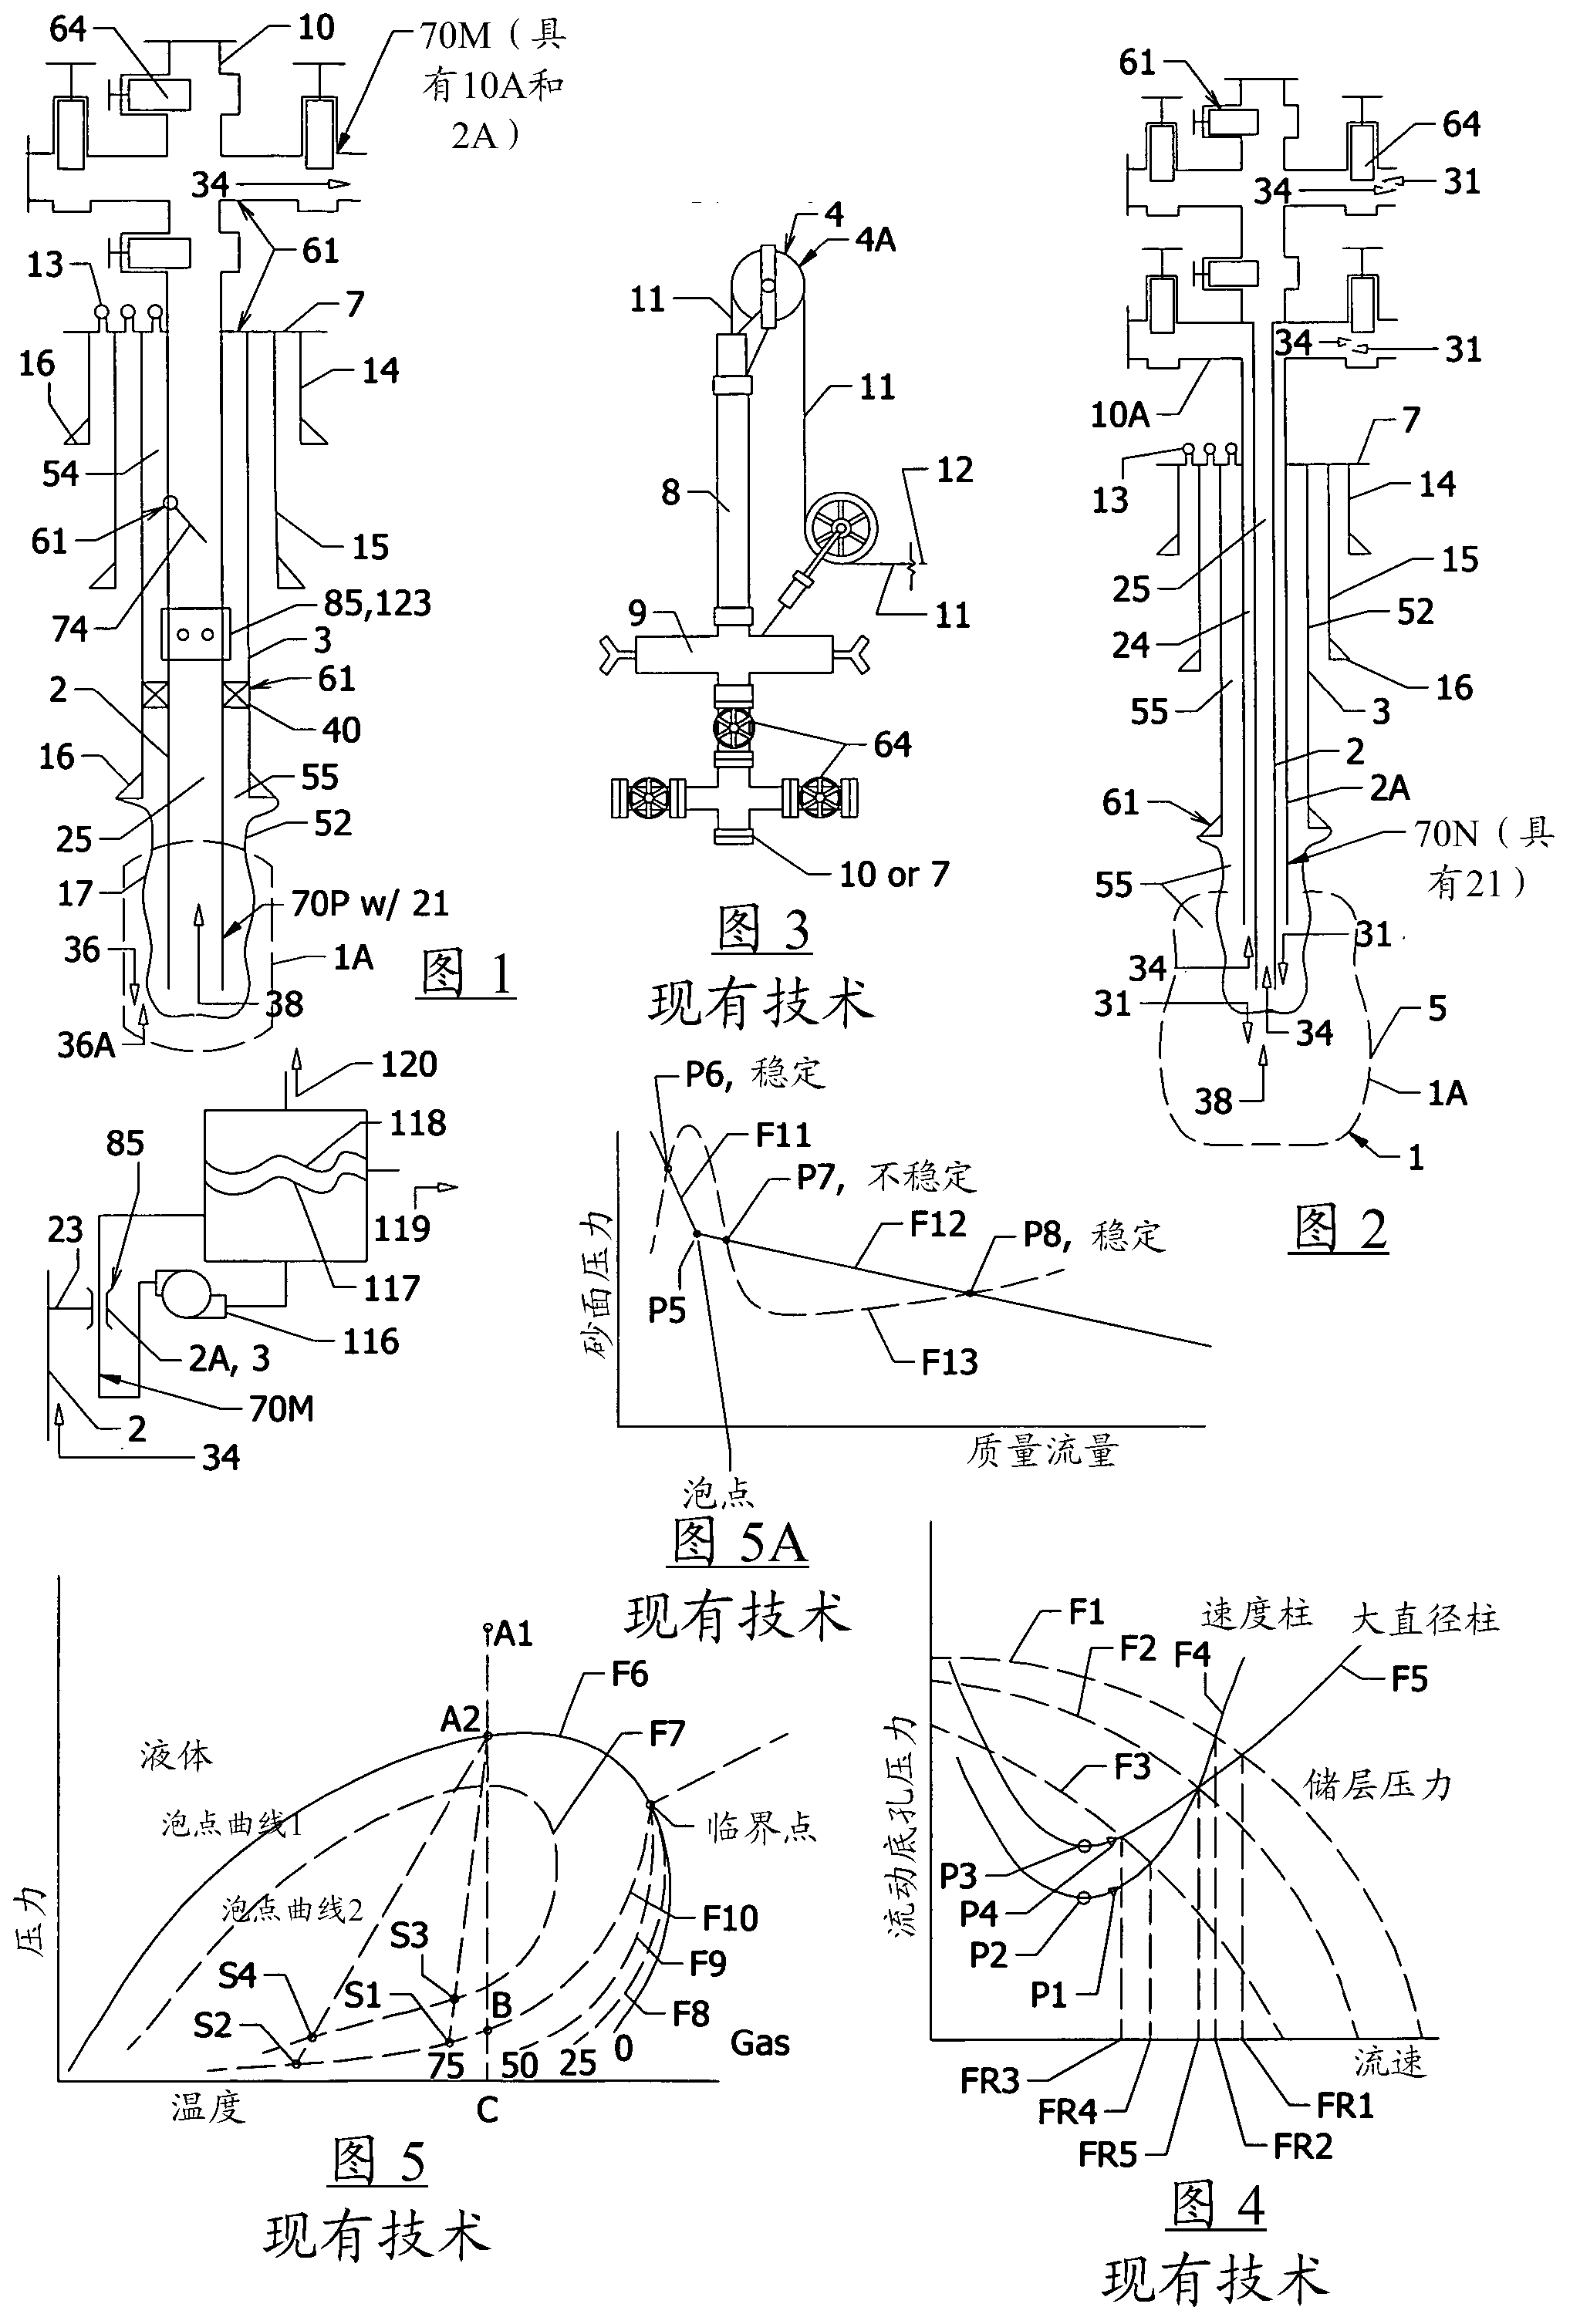 Systems and methods for using a passageway through a subterranean strata